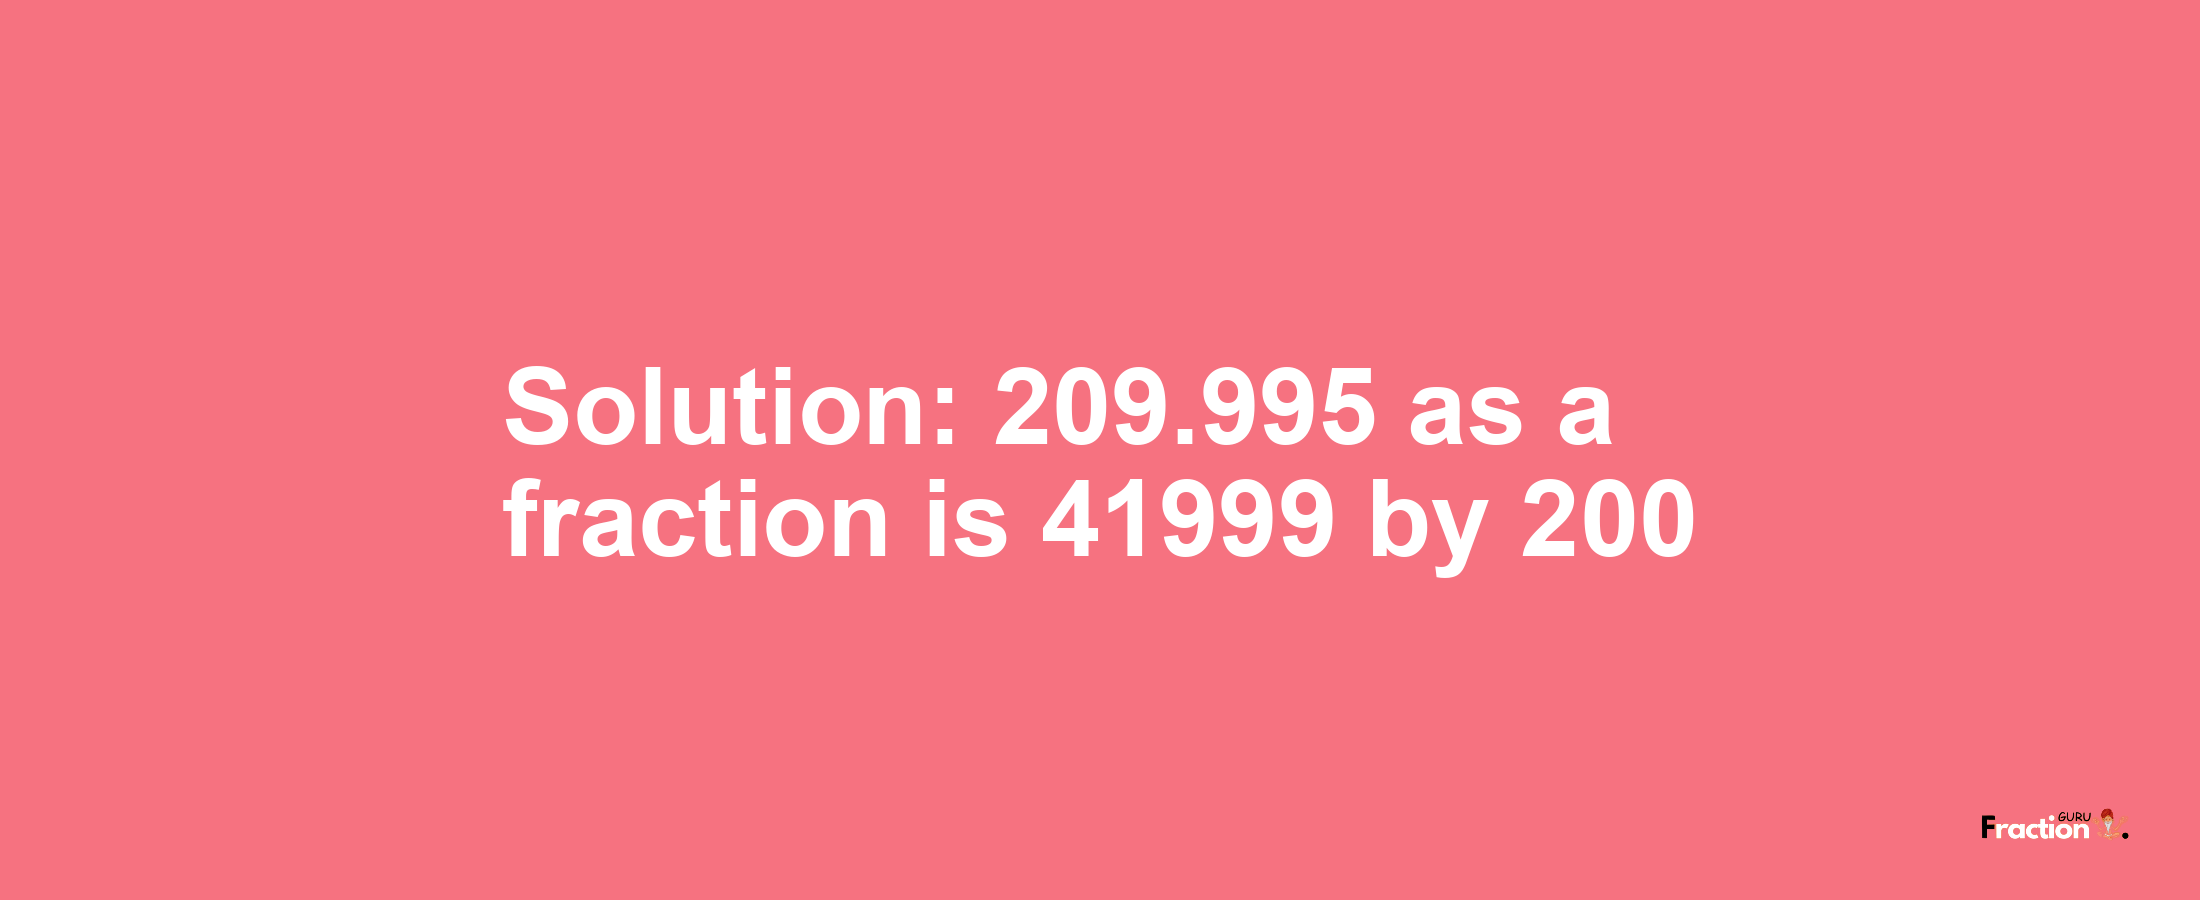 Solution:209.995 as a fraction is 41999/200